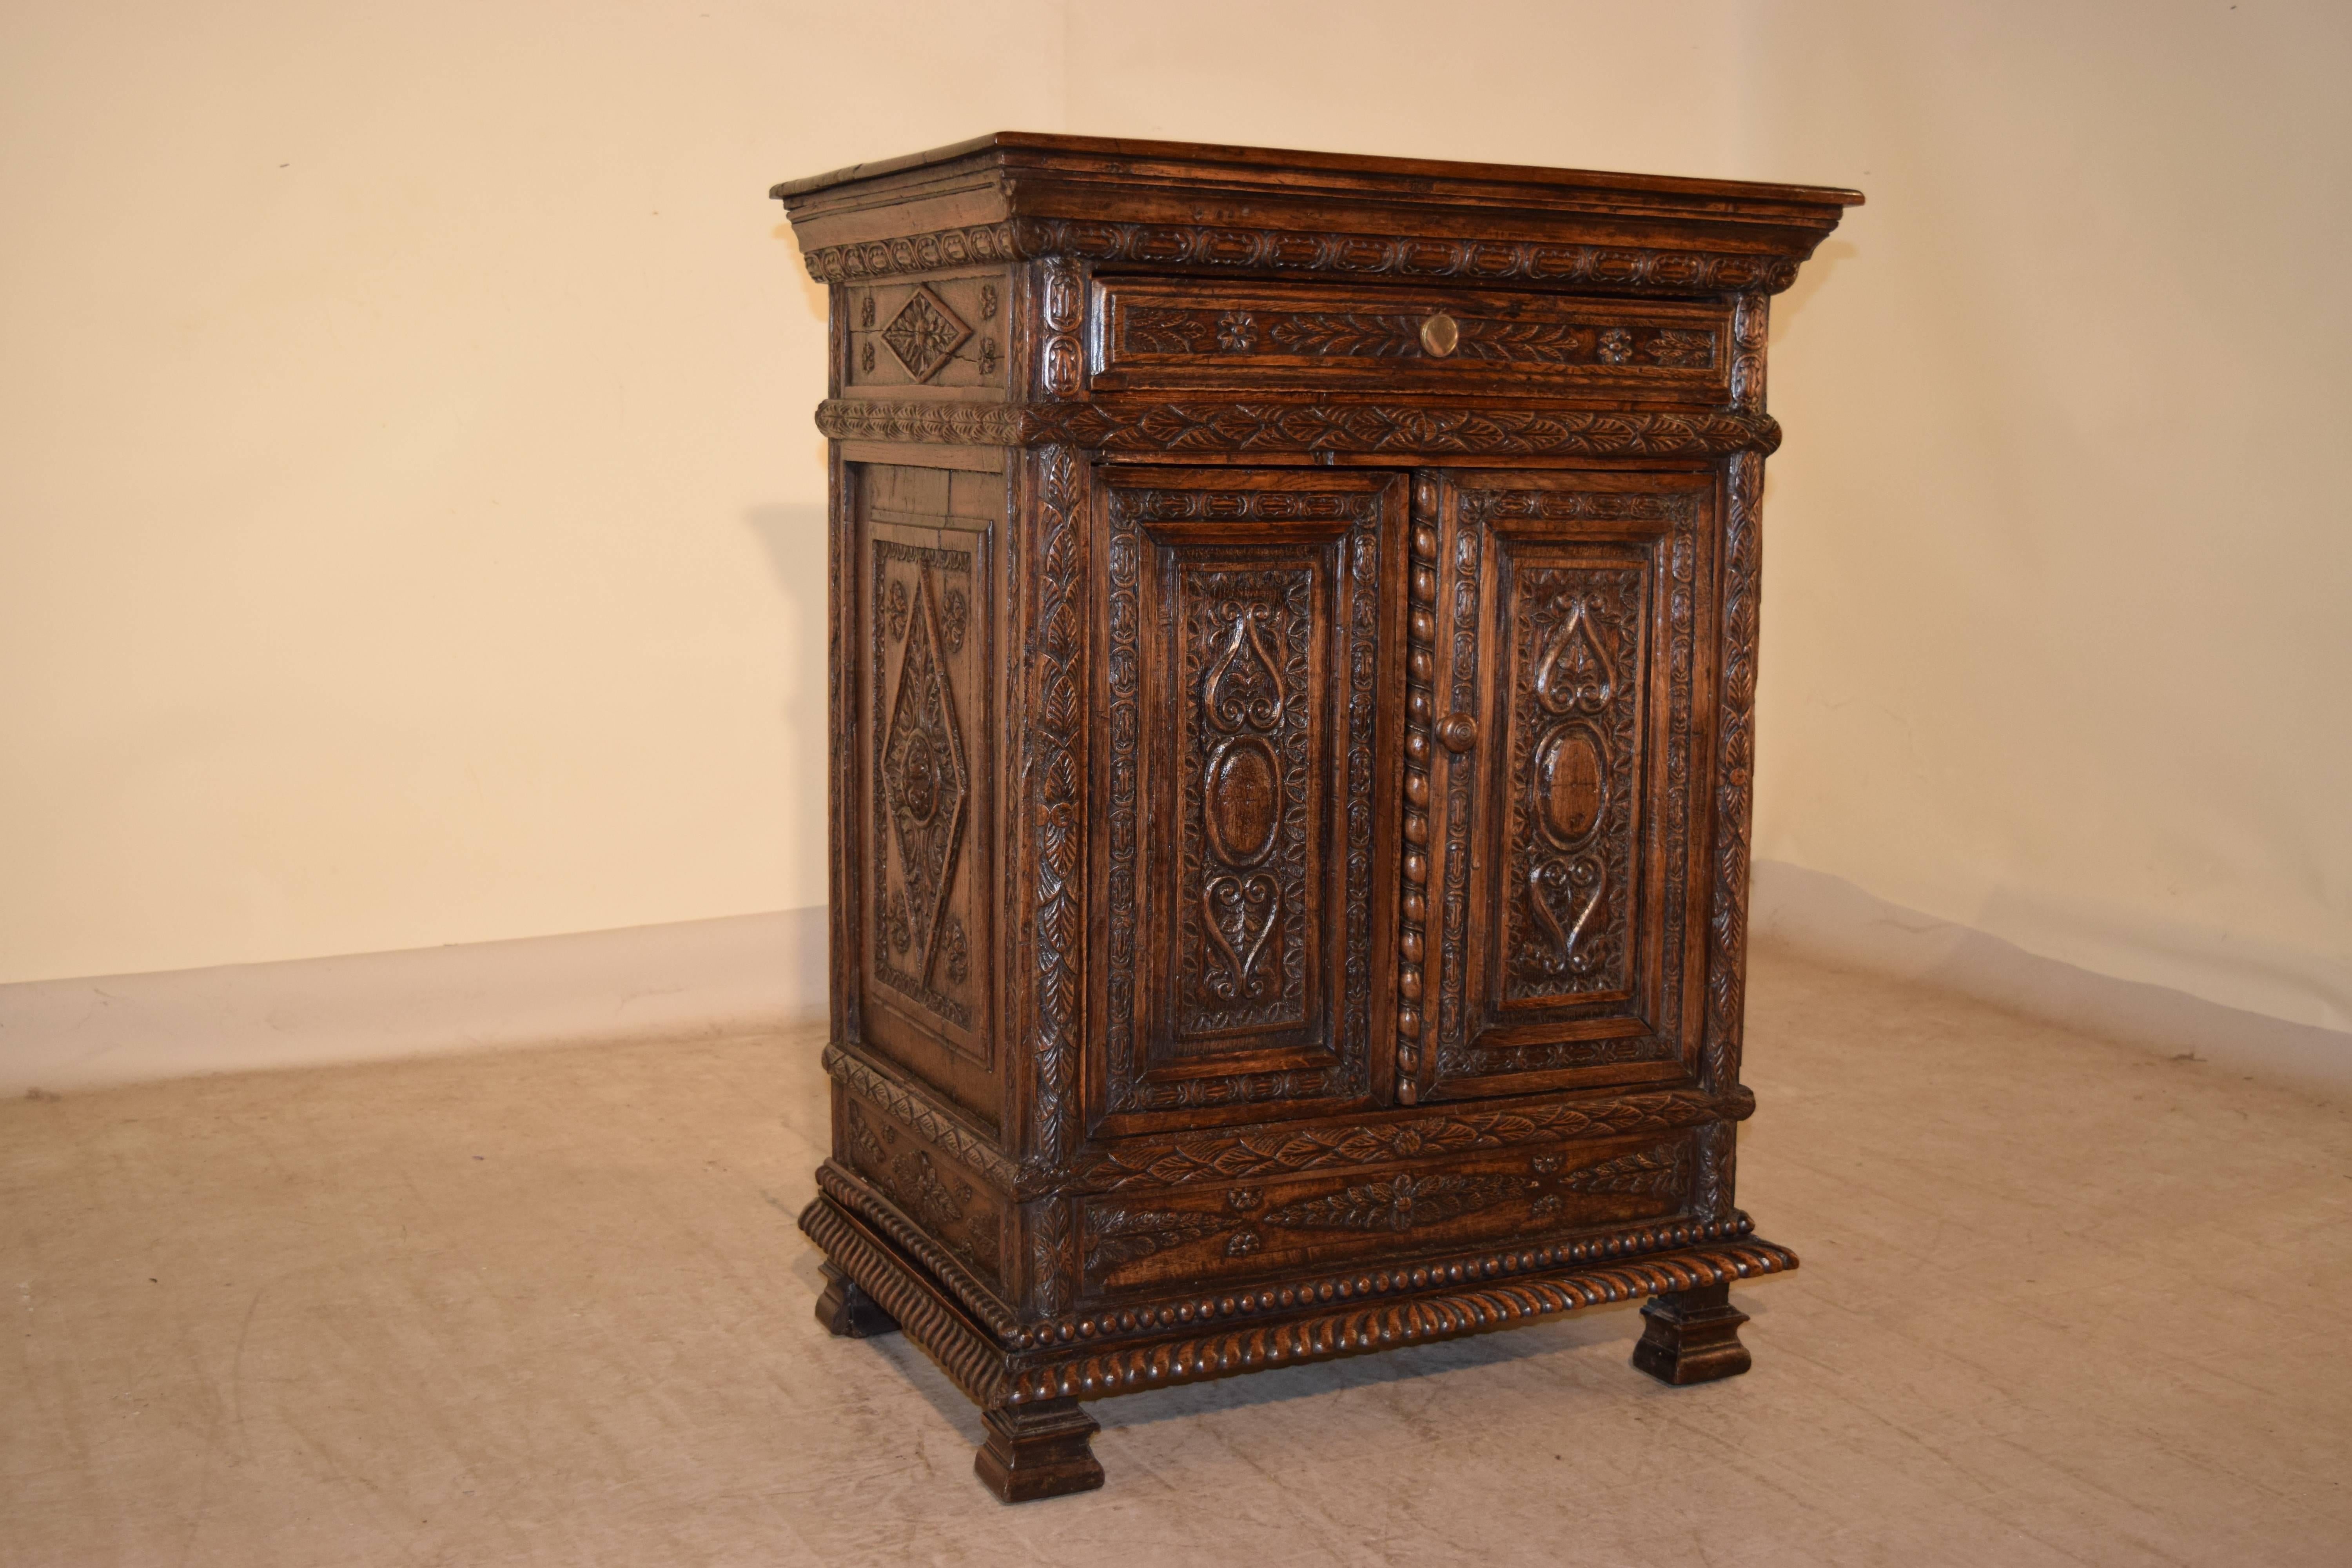 19th century carved oak cabinet from France. The top has a beveled edge, following down to a molded and carved decorated apron. There is a single drawer in the front, over two doors, which open to reveal shelving. The sides are raised and carved